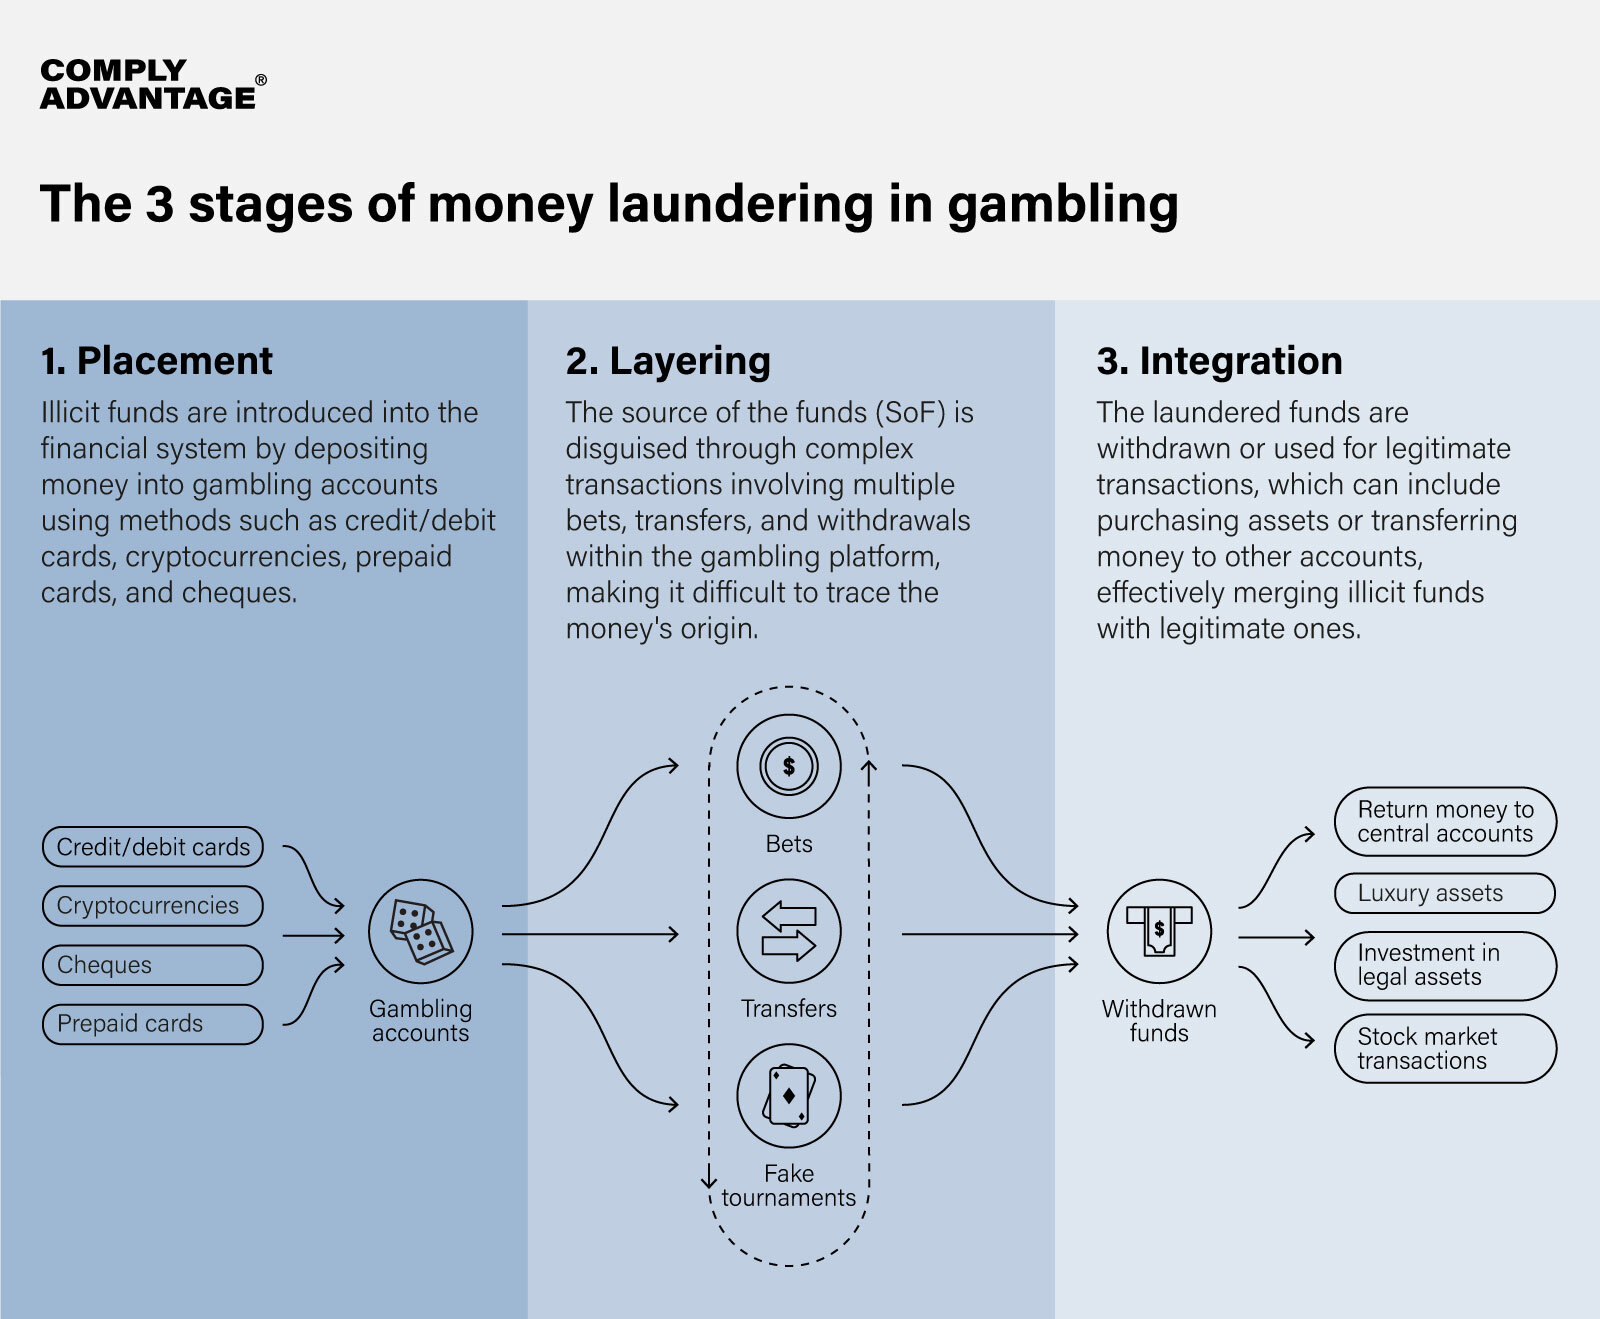 The 3 stages of money laundering in online gambling